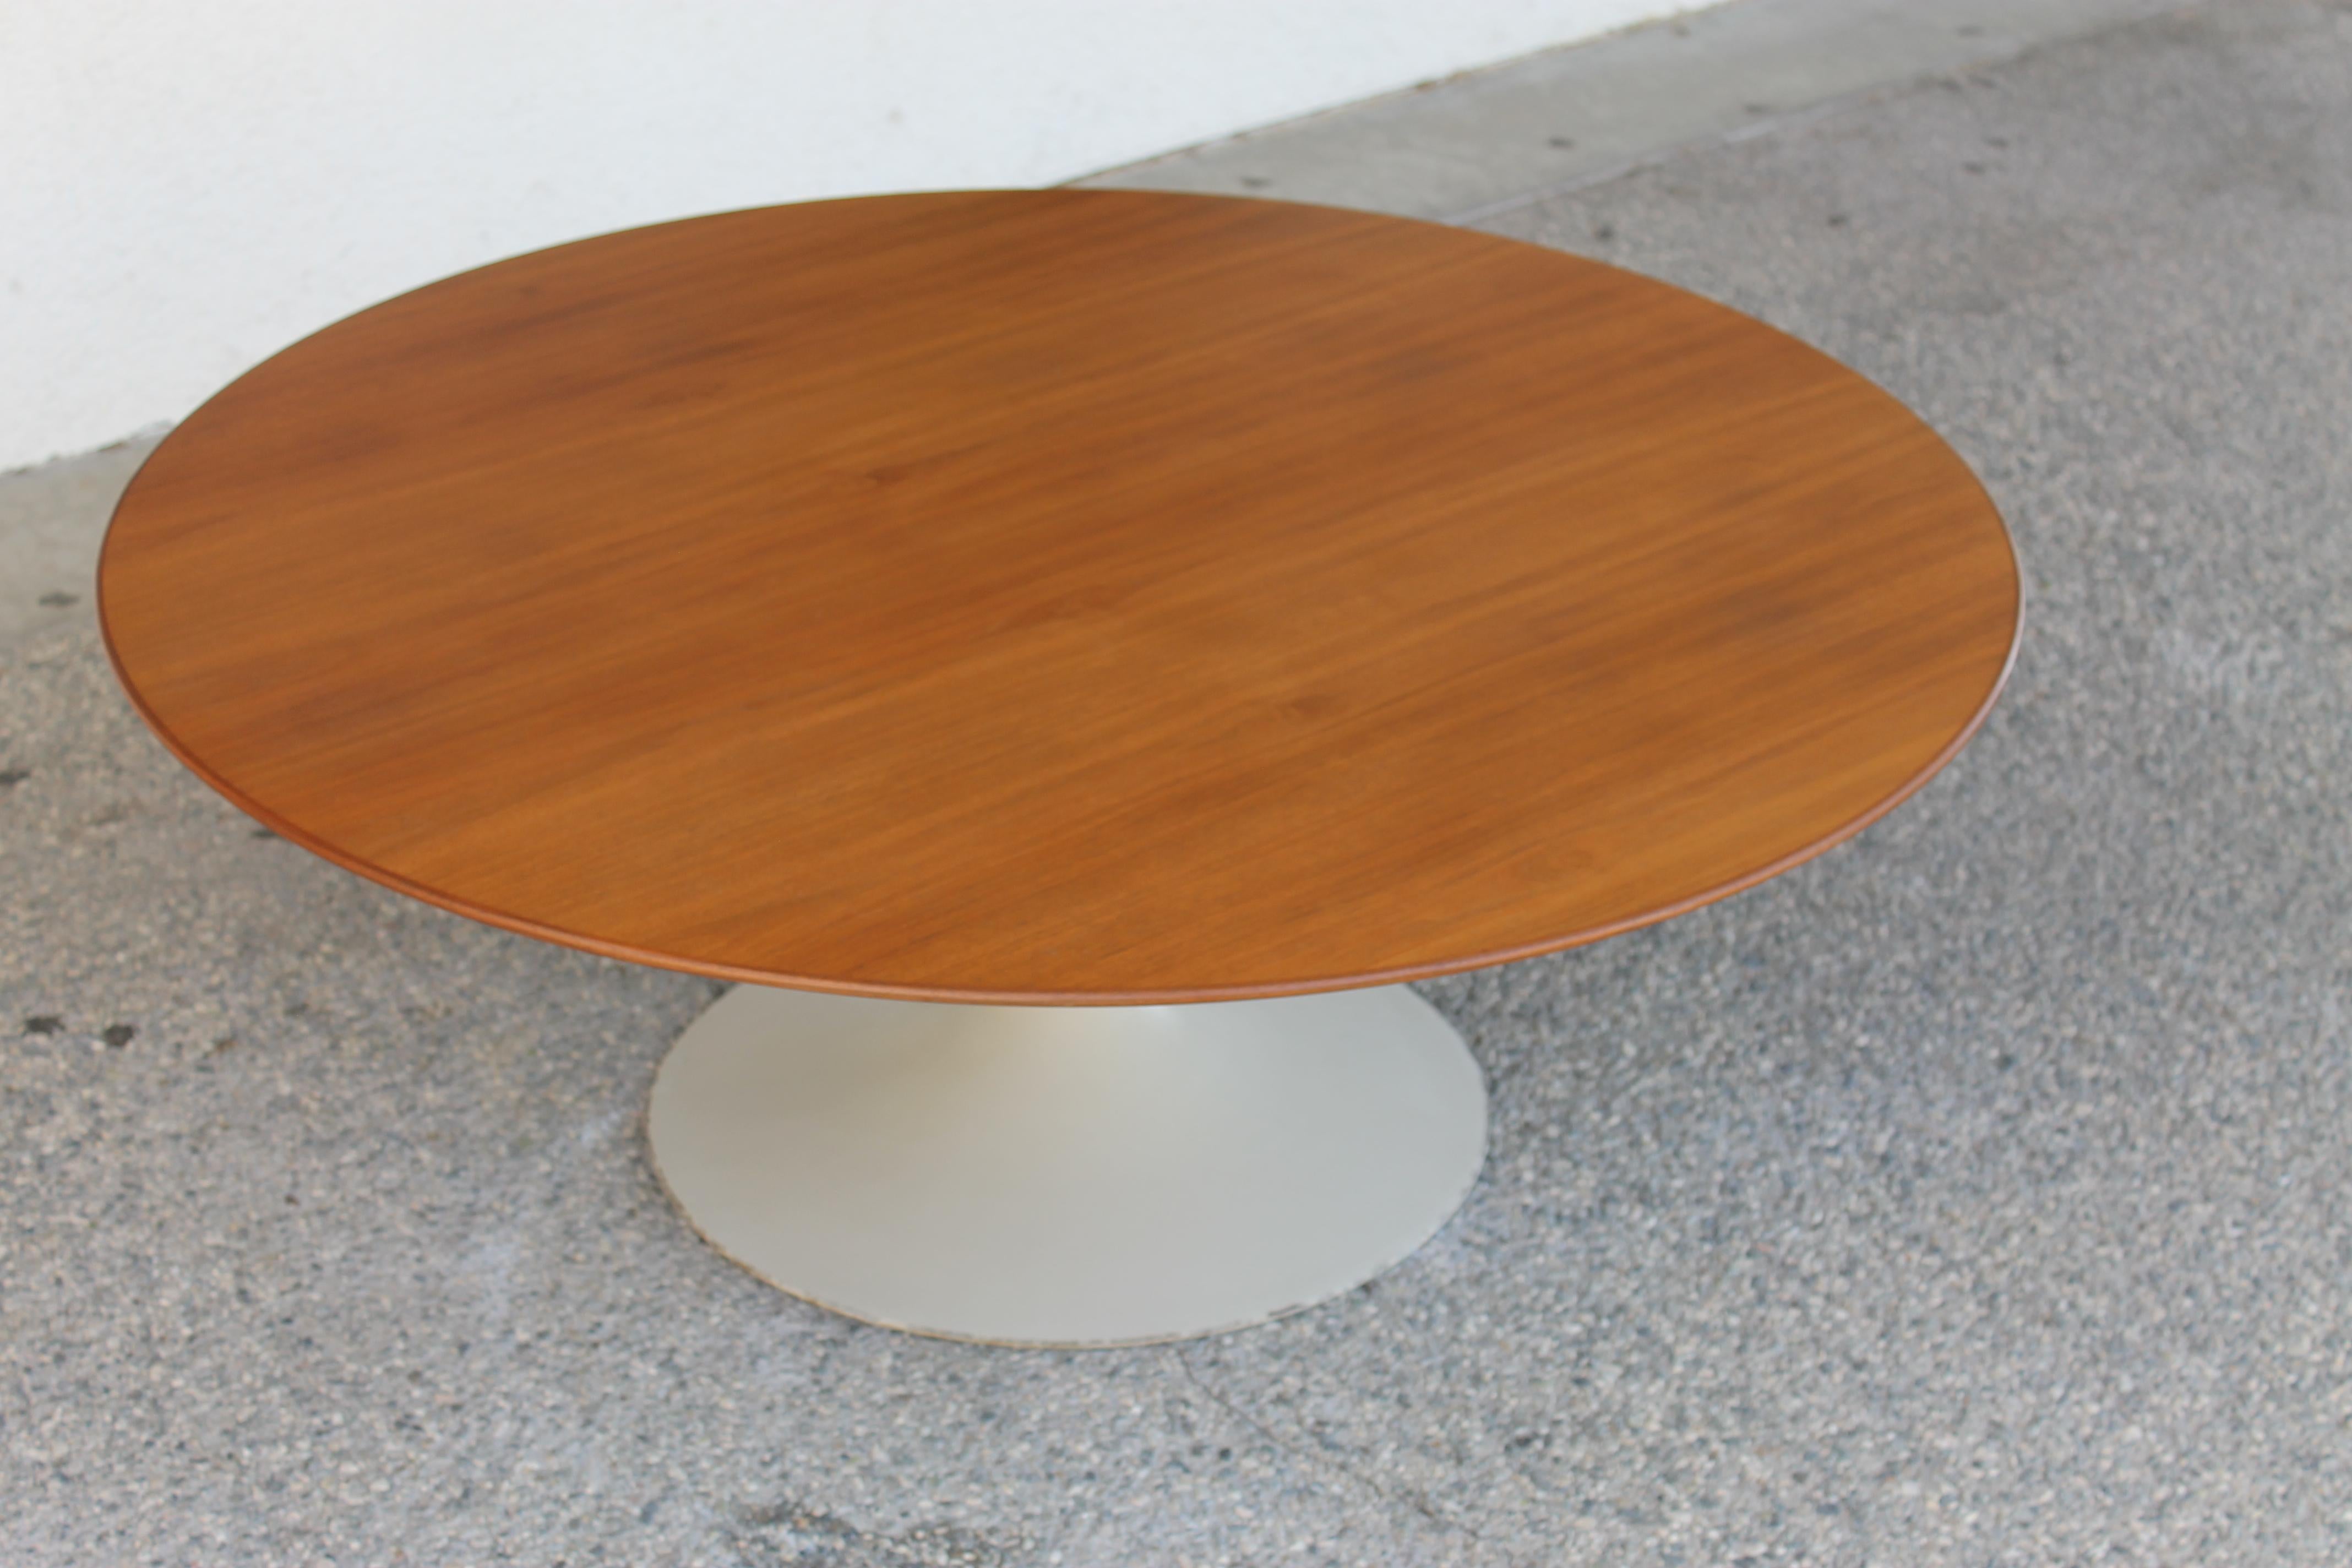 Saarinen coffee table for Knoll Associates, Inc. 320 Park Ave., N. Y. Table features an original powder coated steel base with a refinished walnut top. Manufacturer label appears twice. We had the wood top professionally refinished. The walnut top